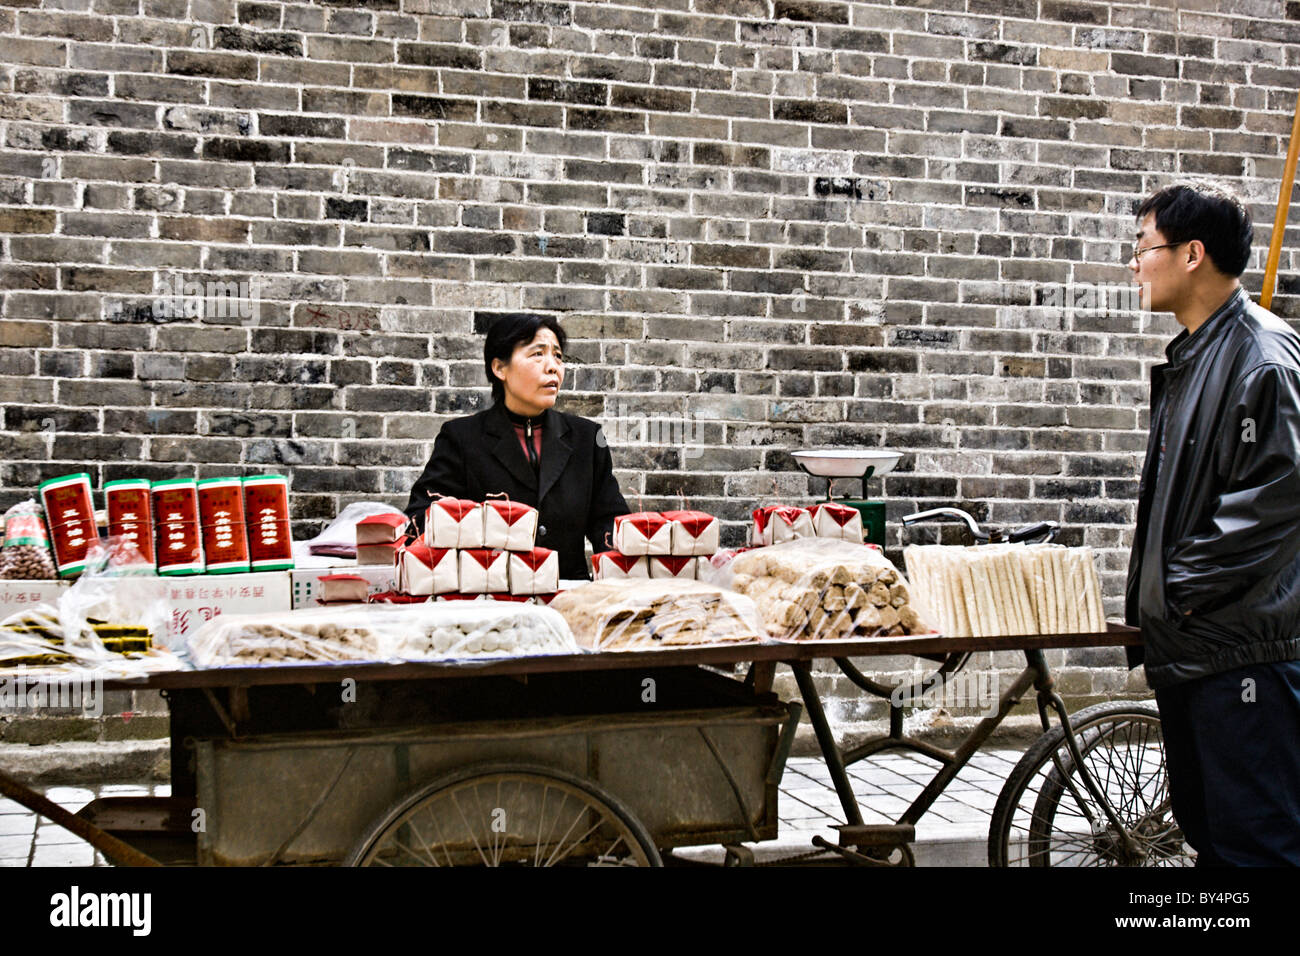 CHINA, XIAN: Chinese woman selling a variety of noodles and tofu from her bicycle cart in the Muslim Quarter of old Xian, China. Stock Photo